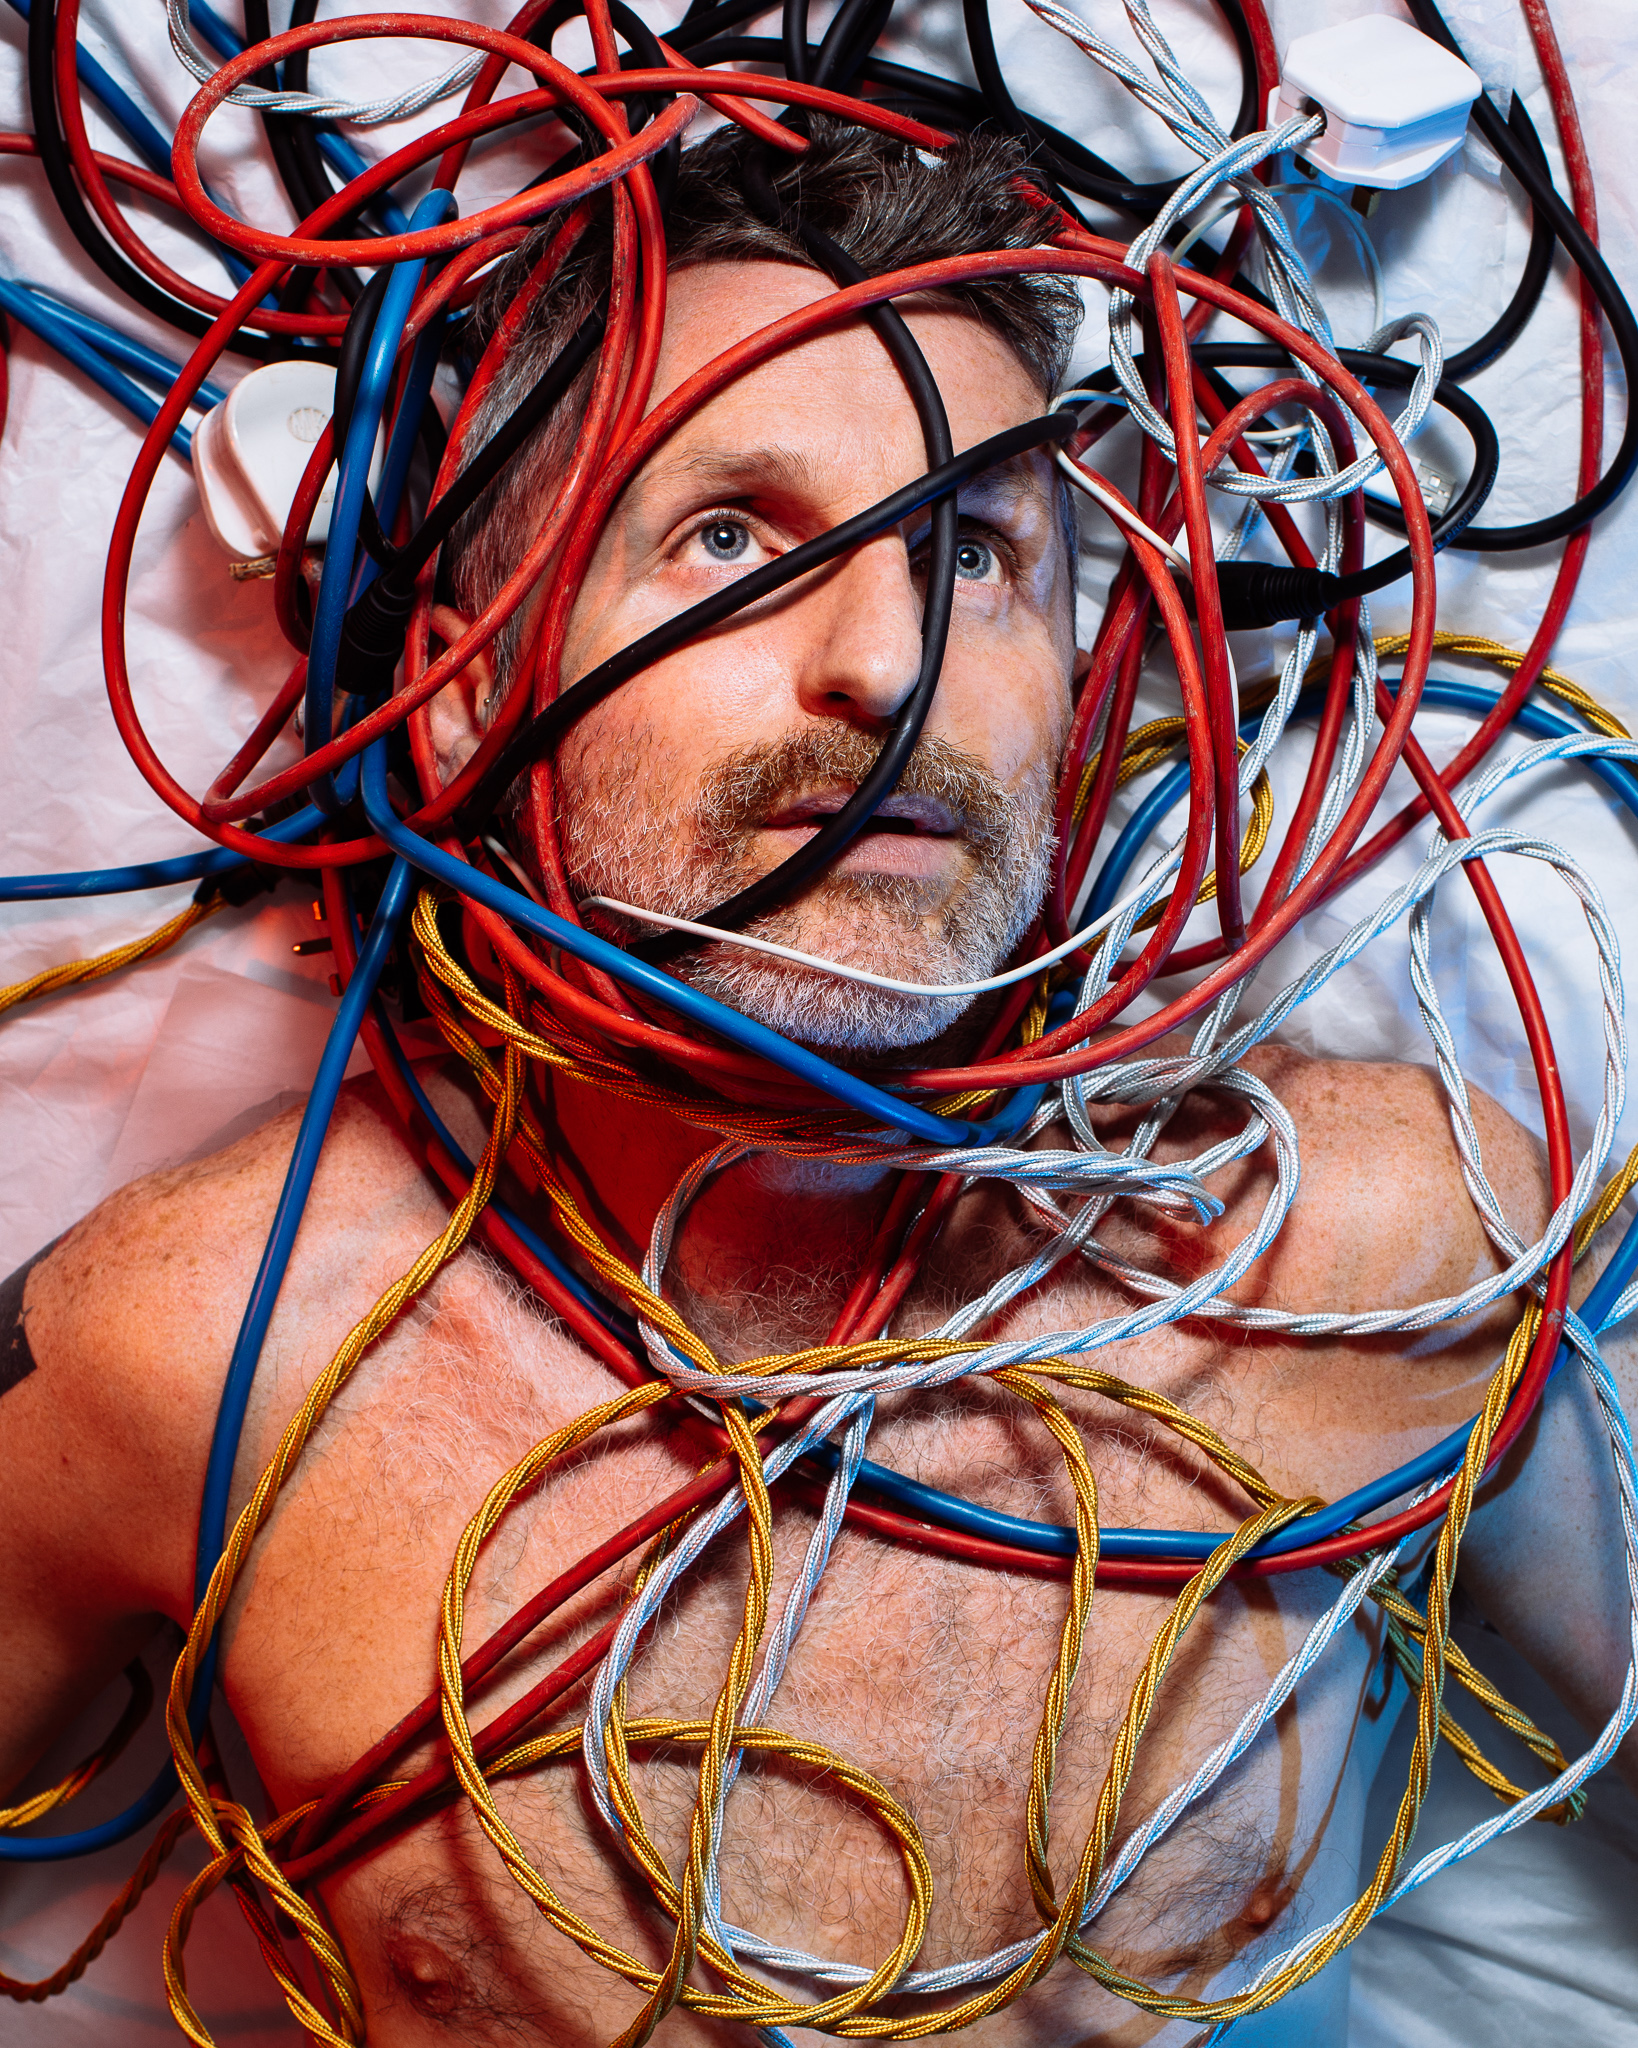 mike is covered in wires because he is of the wired generation